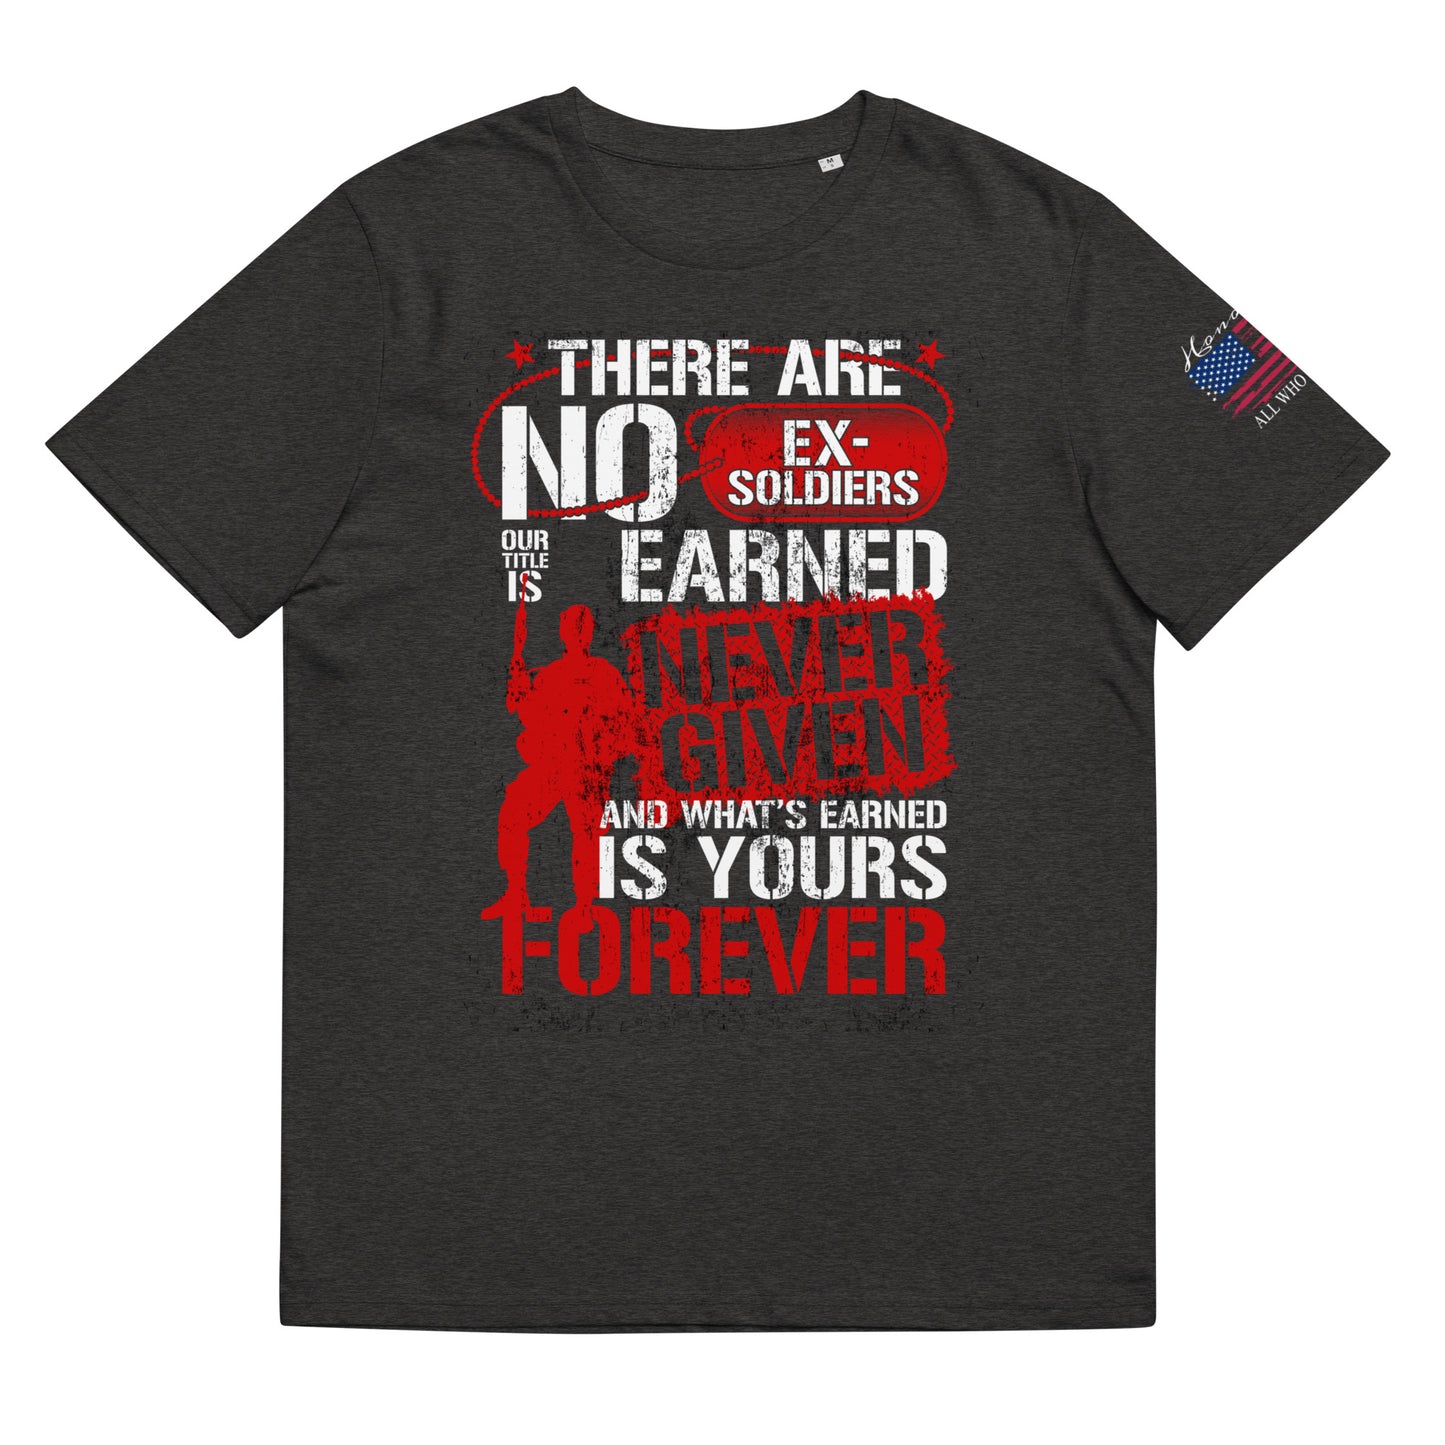 There are no ex soldiers Unisex organic cotton t-shirt